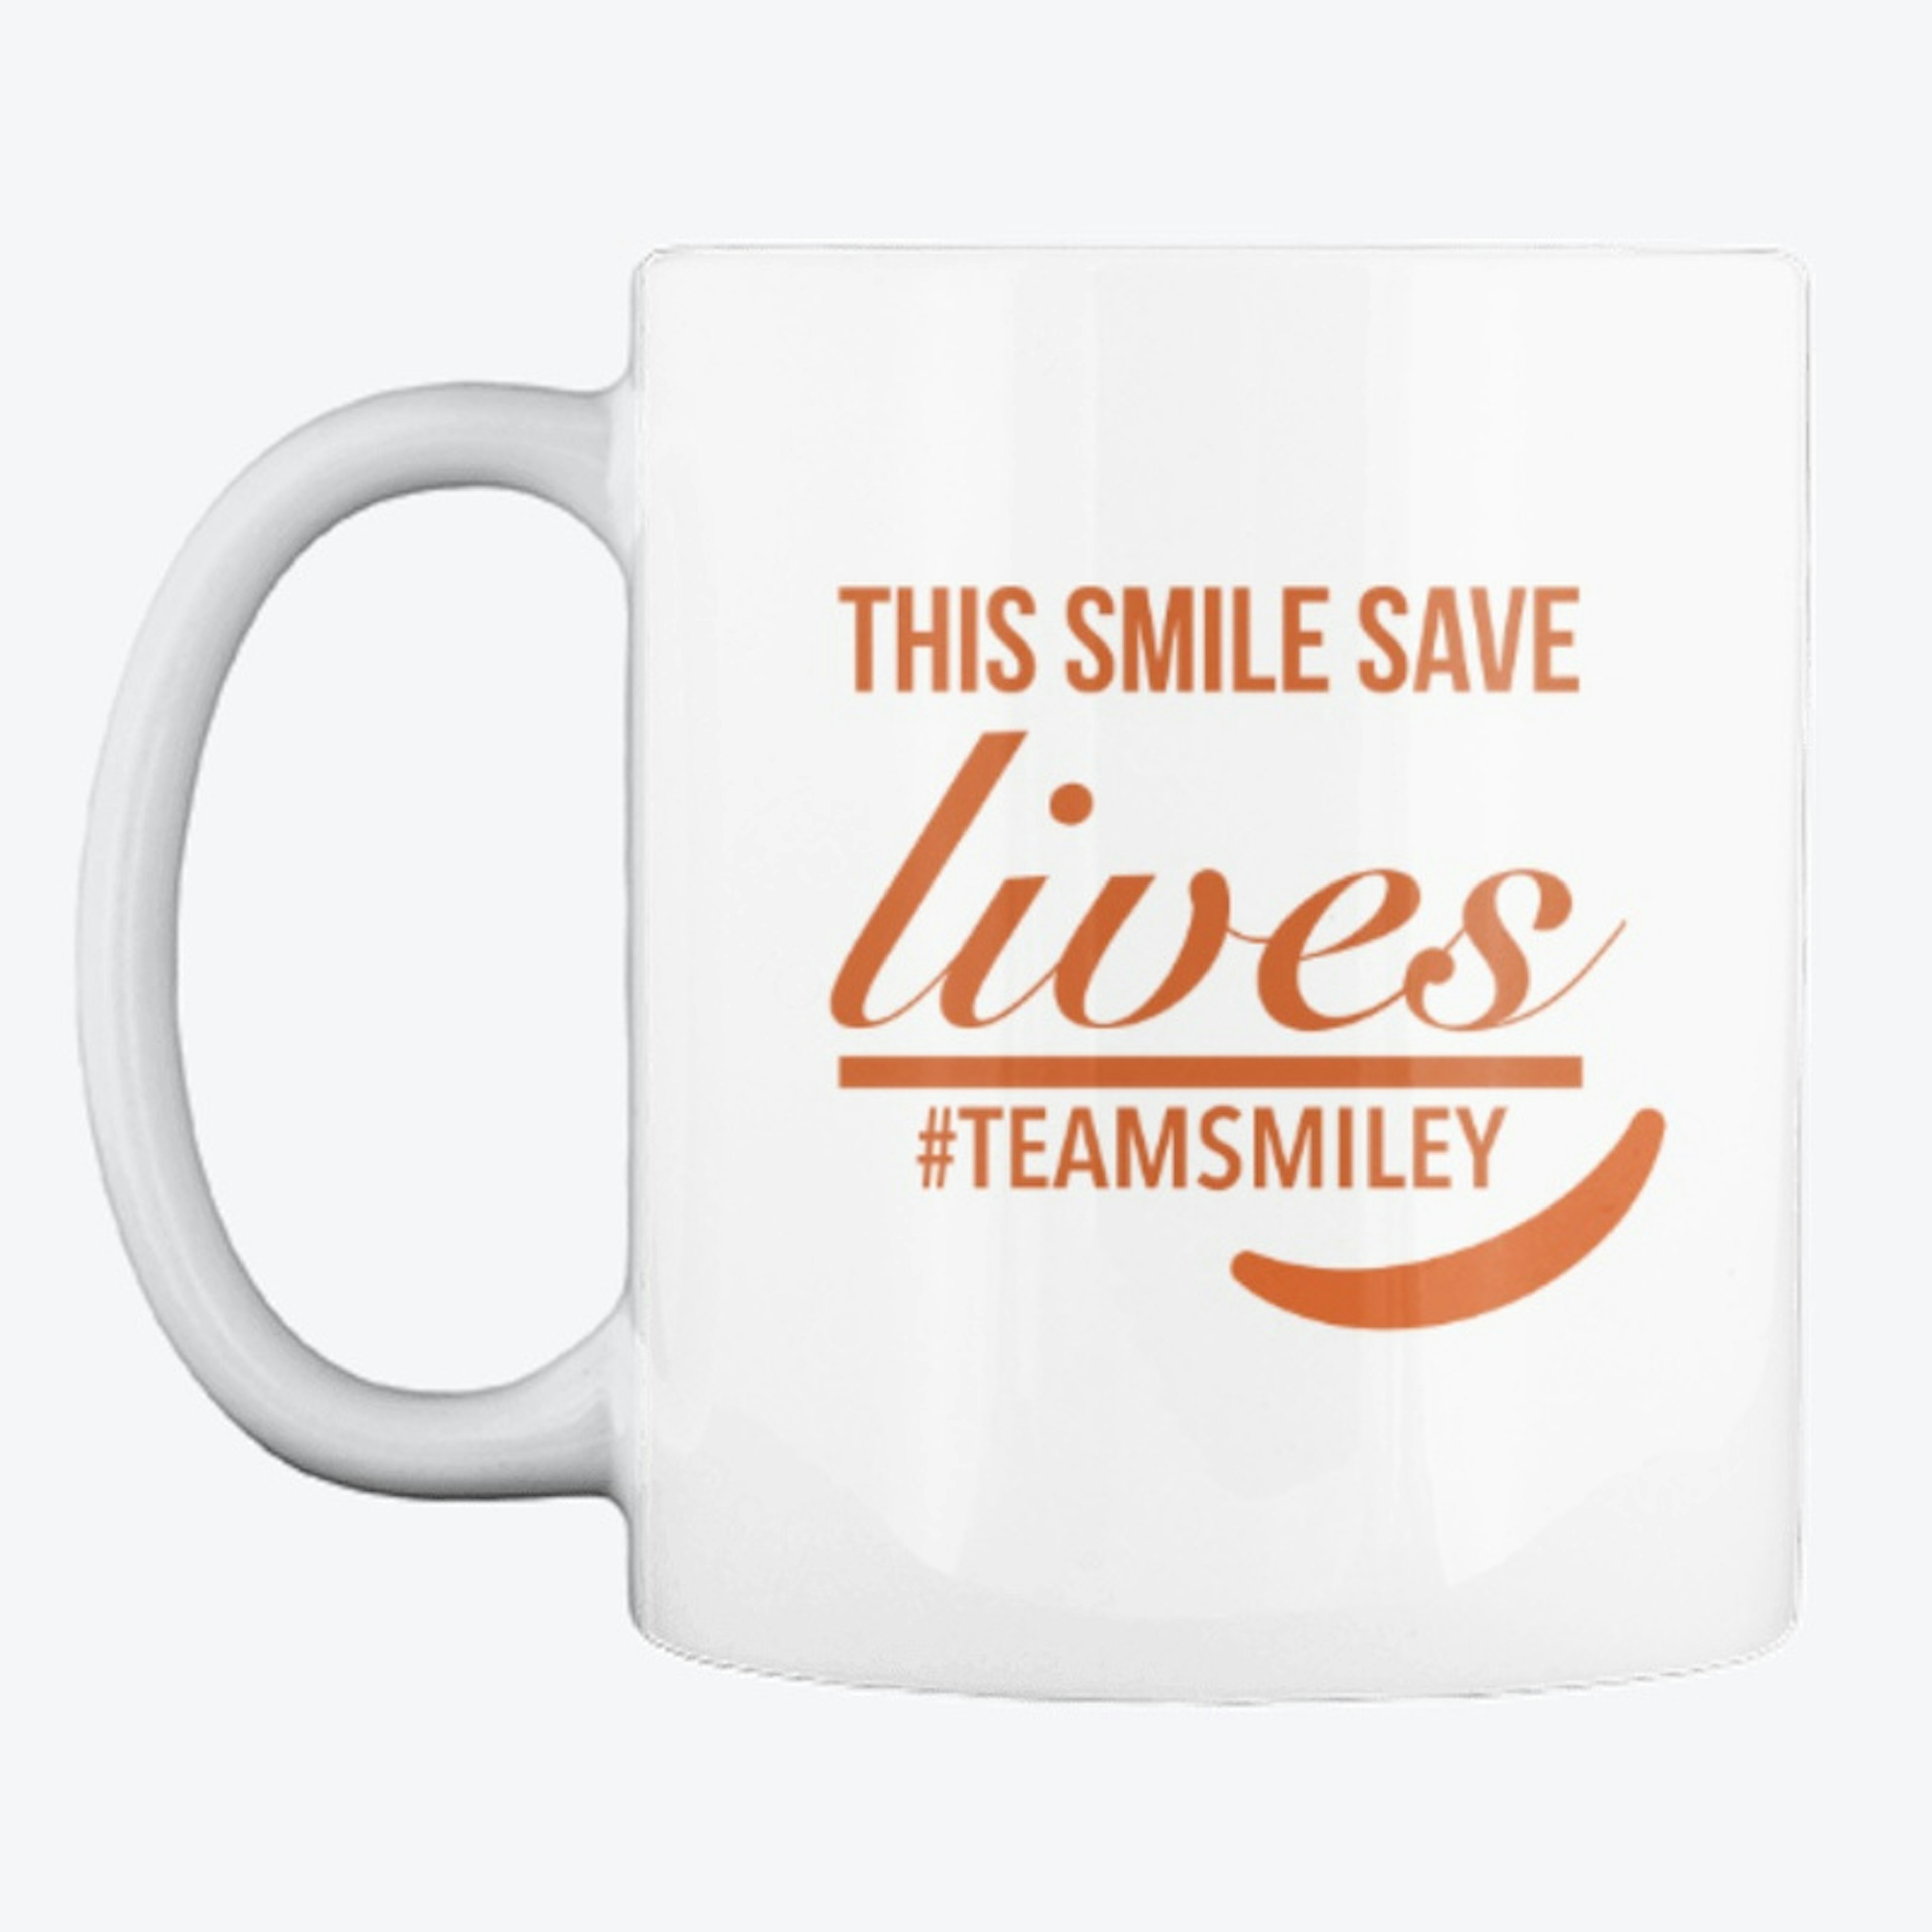 This Smiley Save Lifes Collection!